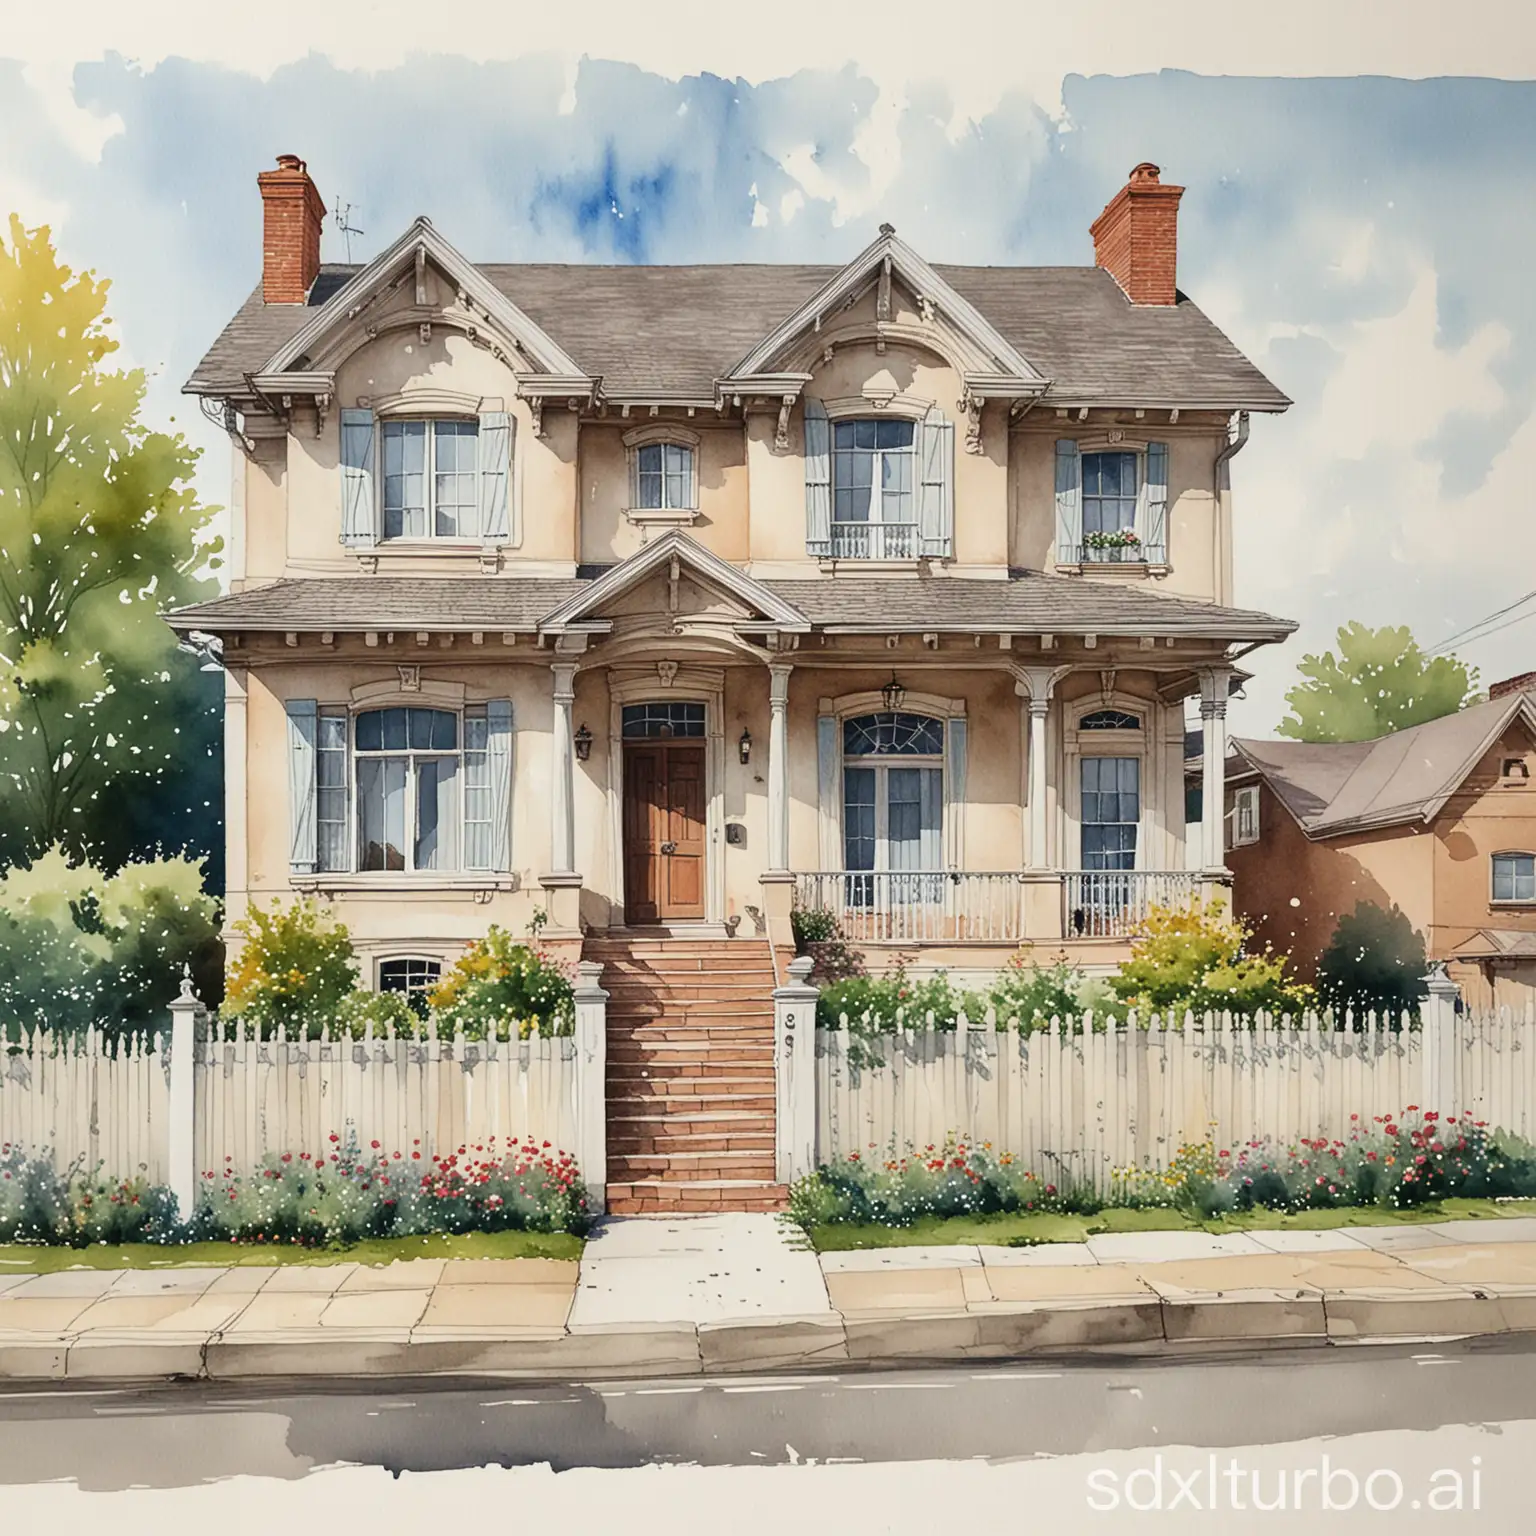 Tranquil-Watercolor-Painting-of-an-Architectural-House